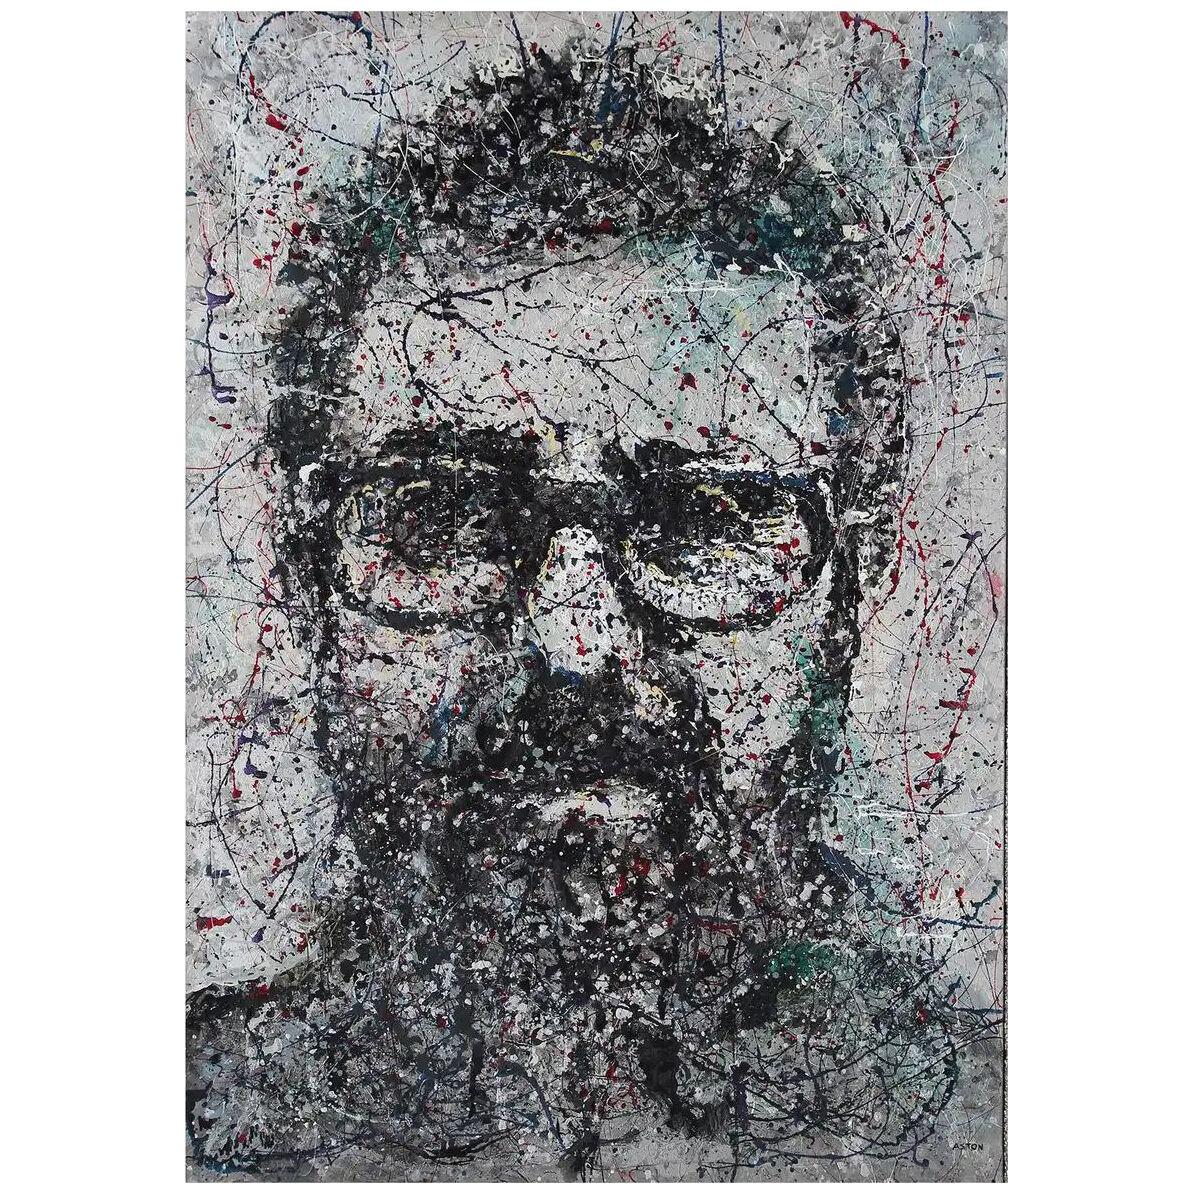 Matt Aston Silver, Black, and Red Portrait Abstract Splatter Painting on Canvas